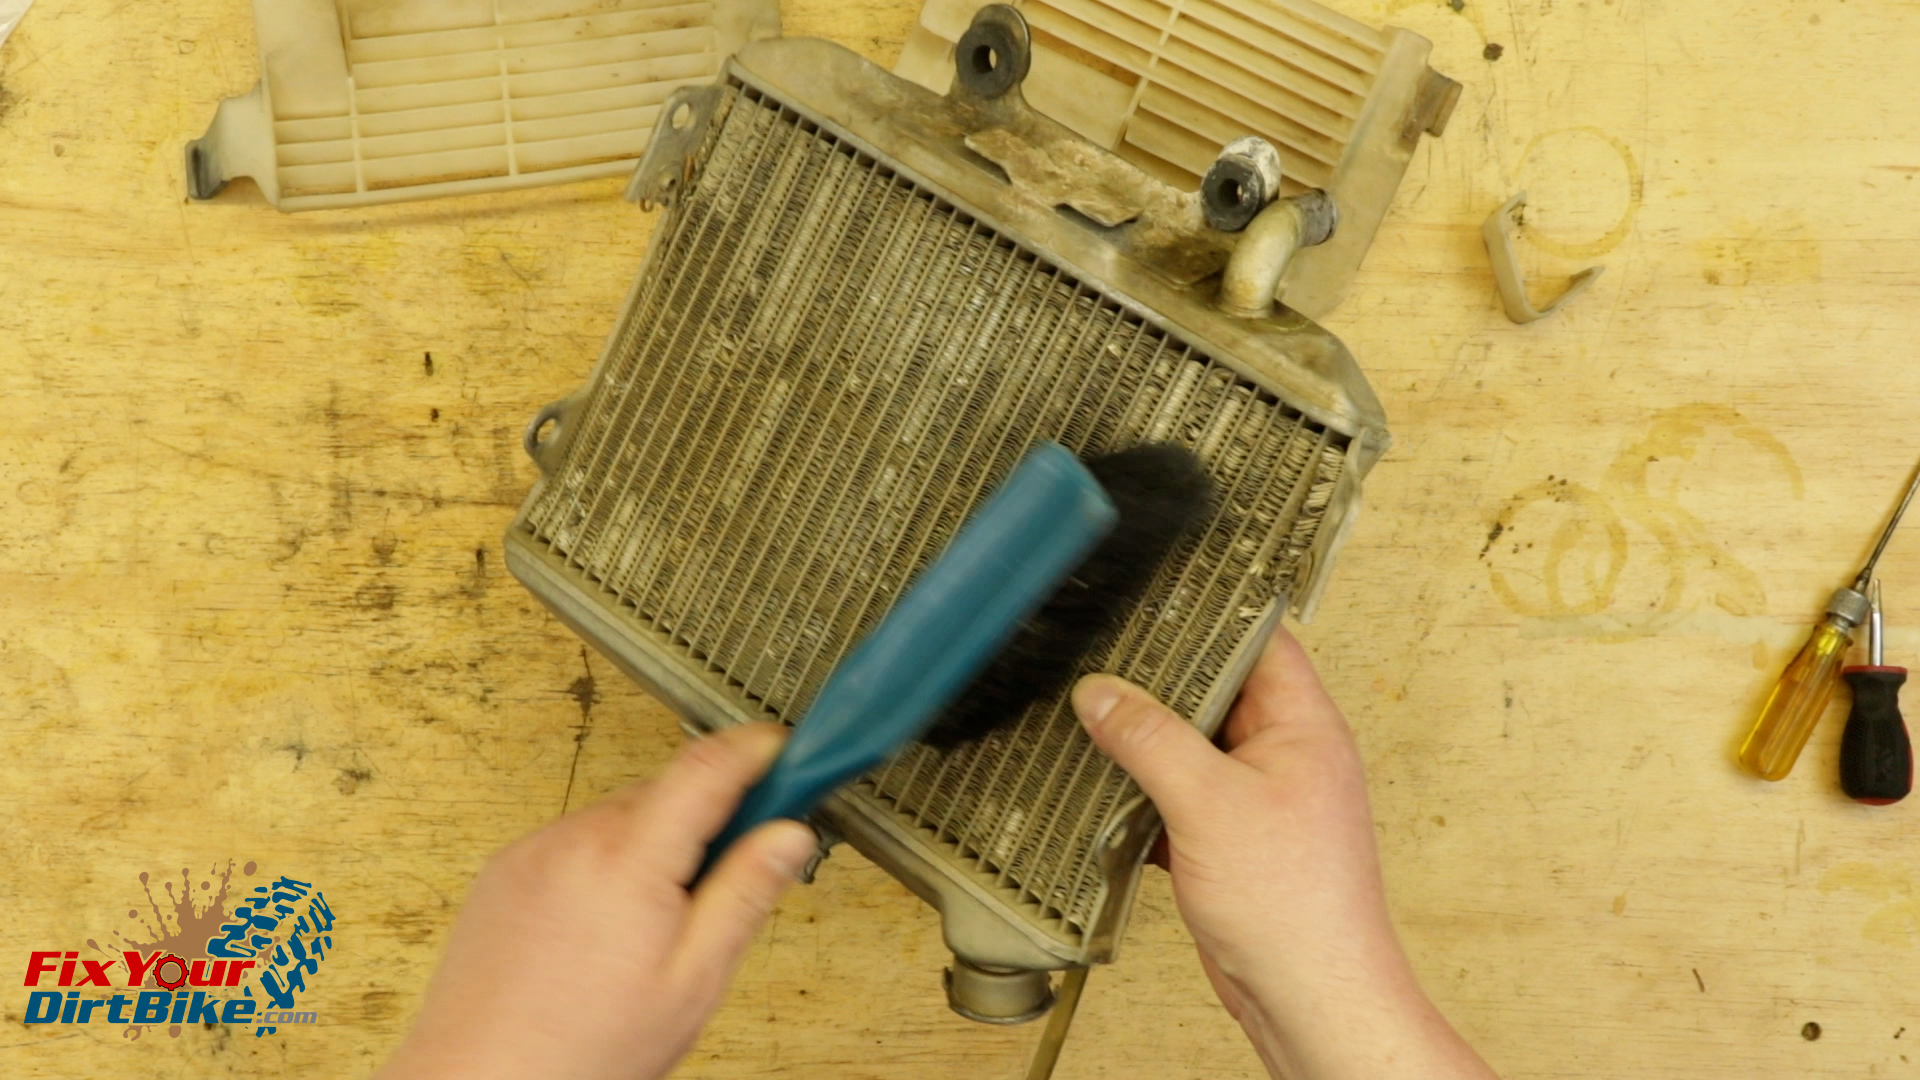 3 - Clean Radiator With A SOFT Brush